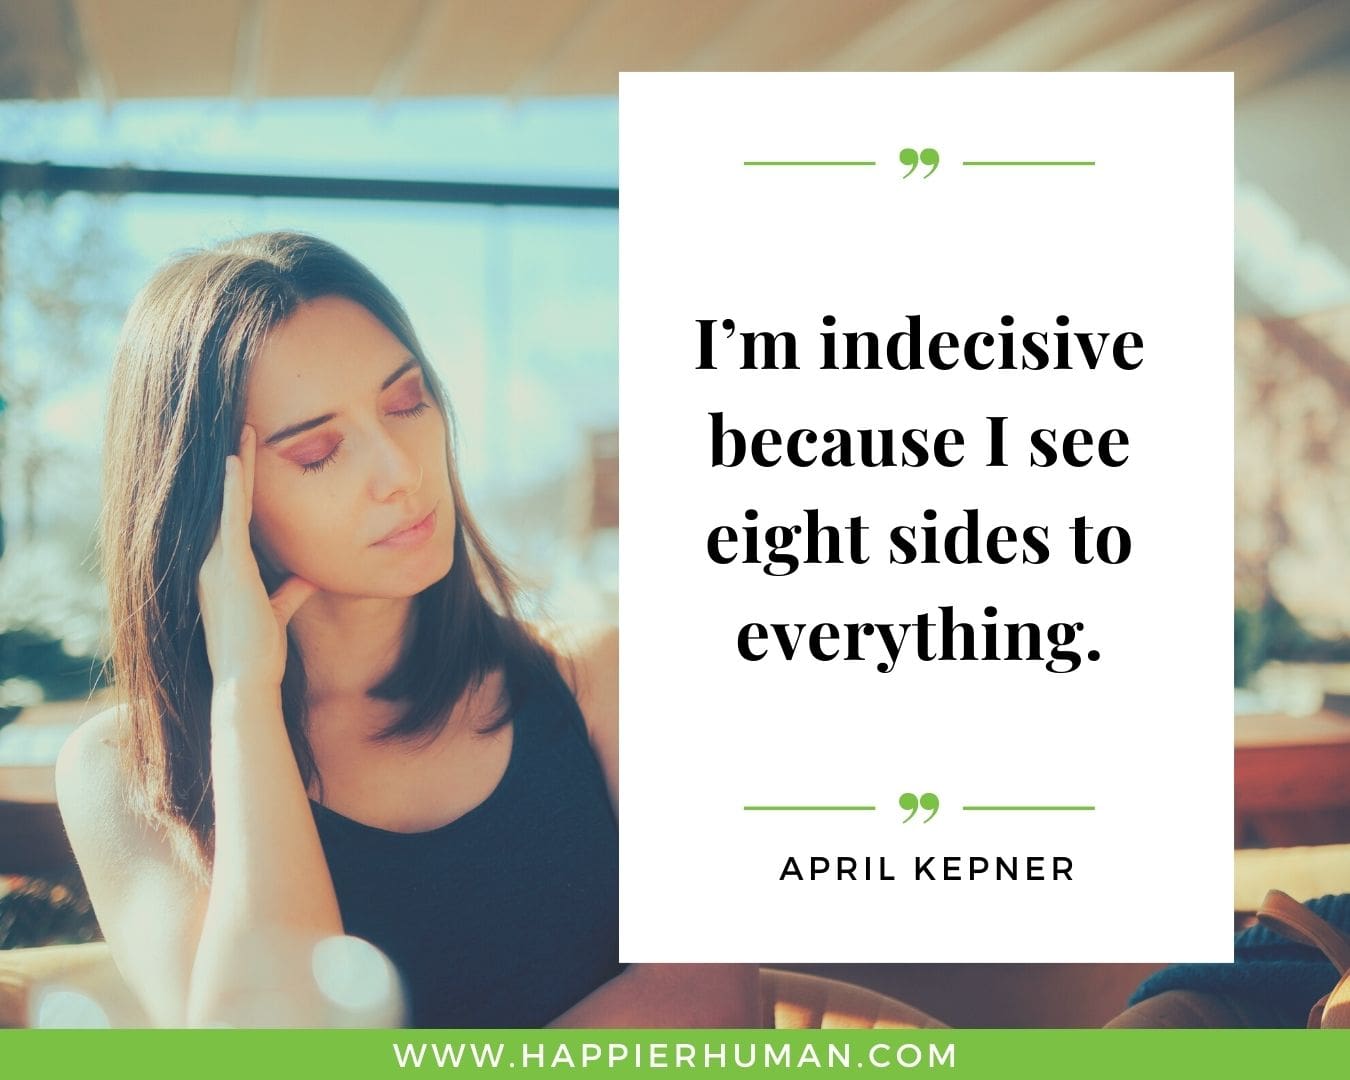 Introvert Quotes - “I’m indecisive because I see eight sides to everything.” – April Kepner